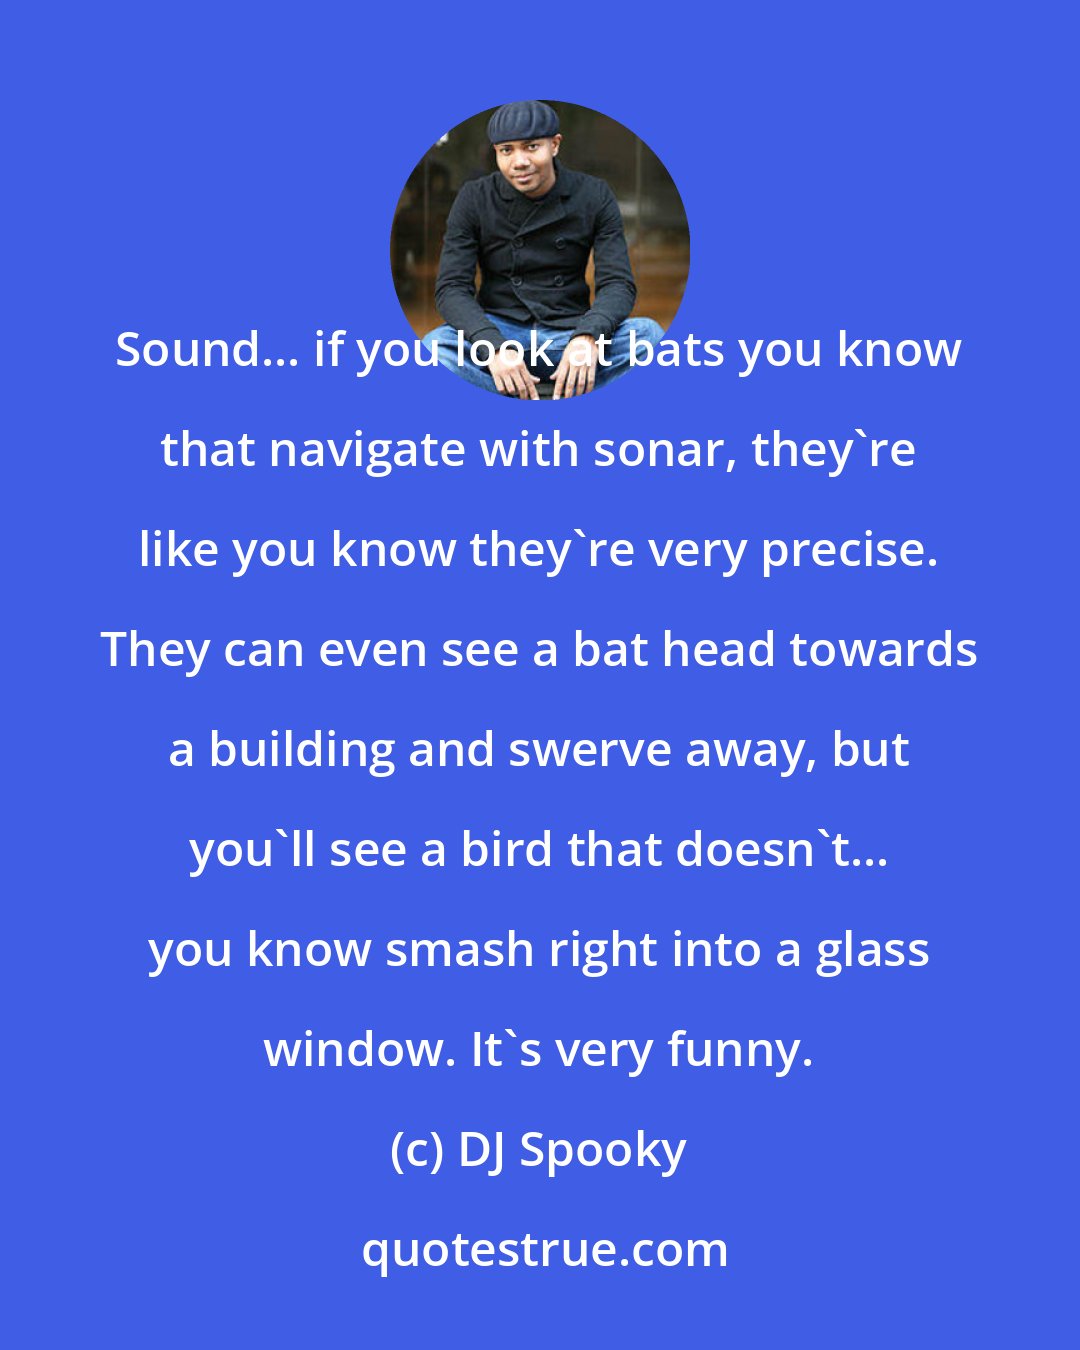 DJ Spooky: Sound... if you look at bats you know that navigate with sonar, they're like you know they're very precise. They can even see a bat head towards a building and swerve away, but you'll see a bird that doesn't... you know smash right into a glass window. It's very funny.